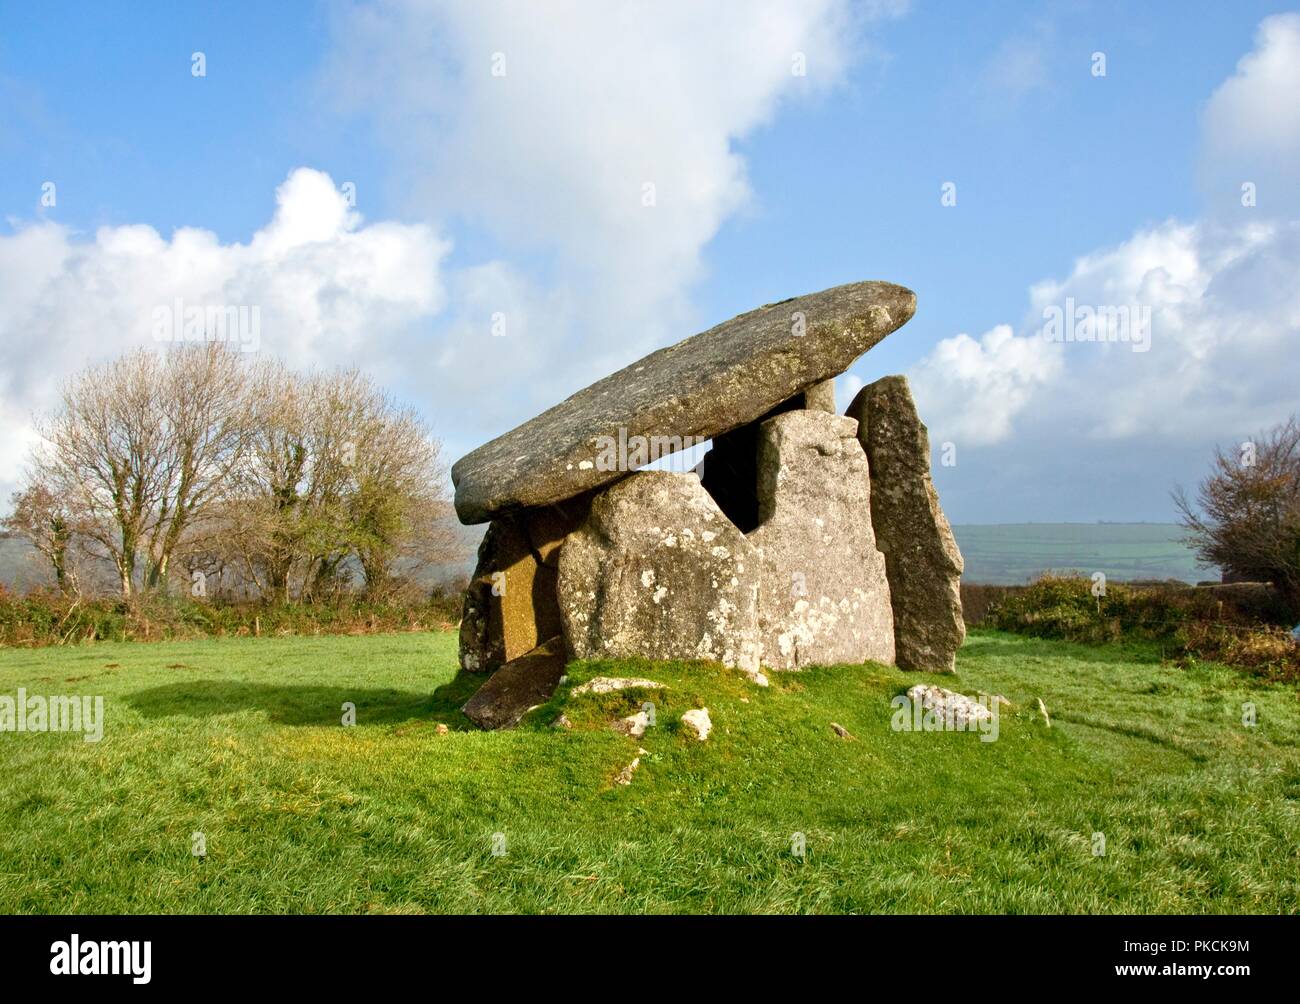 Quoit Trethevy, St Cleer, Cornwall, 2006. Artista: Storico Inghilterra fotografo personale. Foto Stock